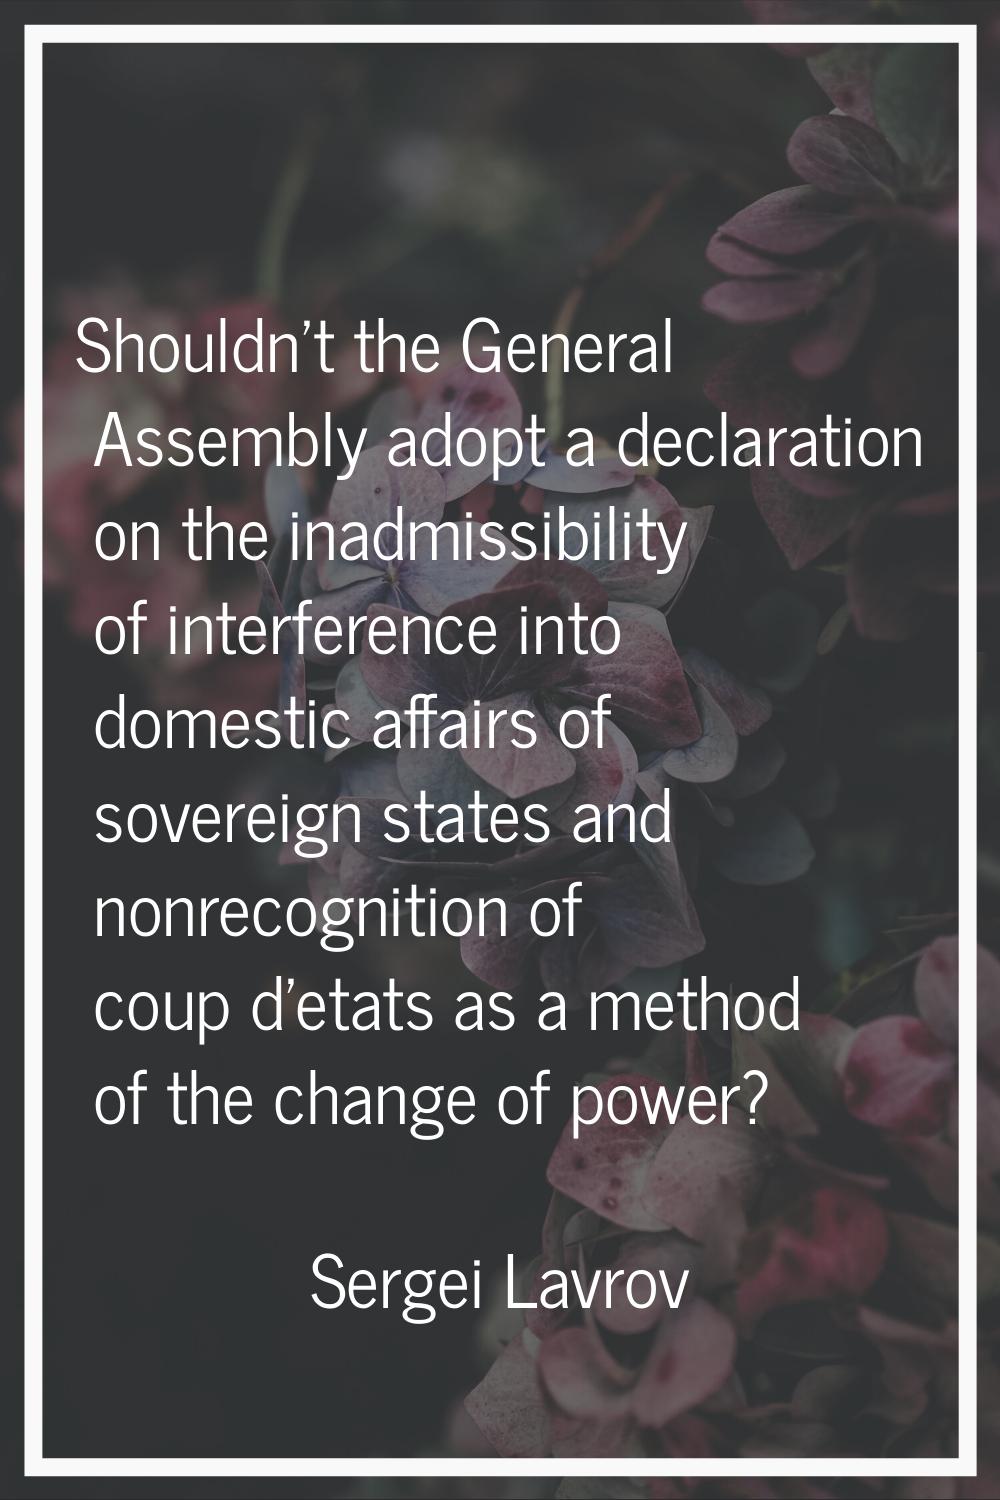 Shouldn't the General Assembly adopt a declaration on the inadmissibility of interference into dome